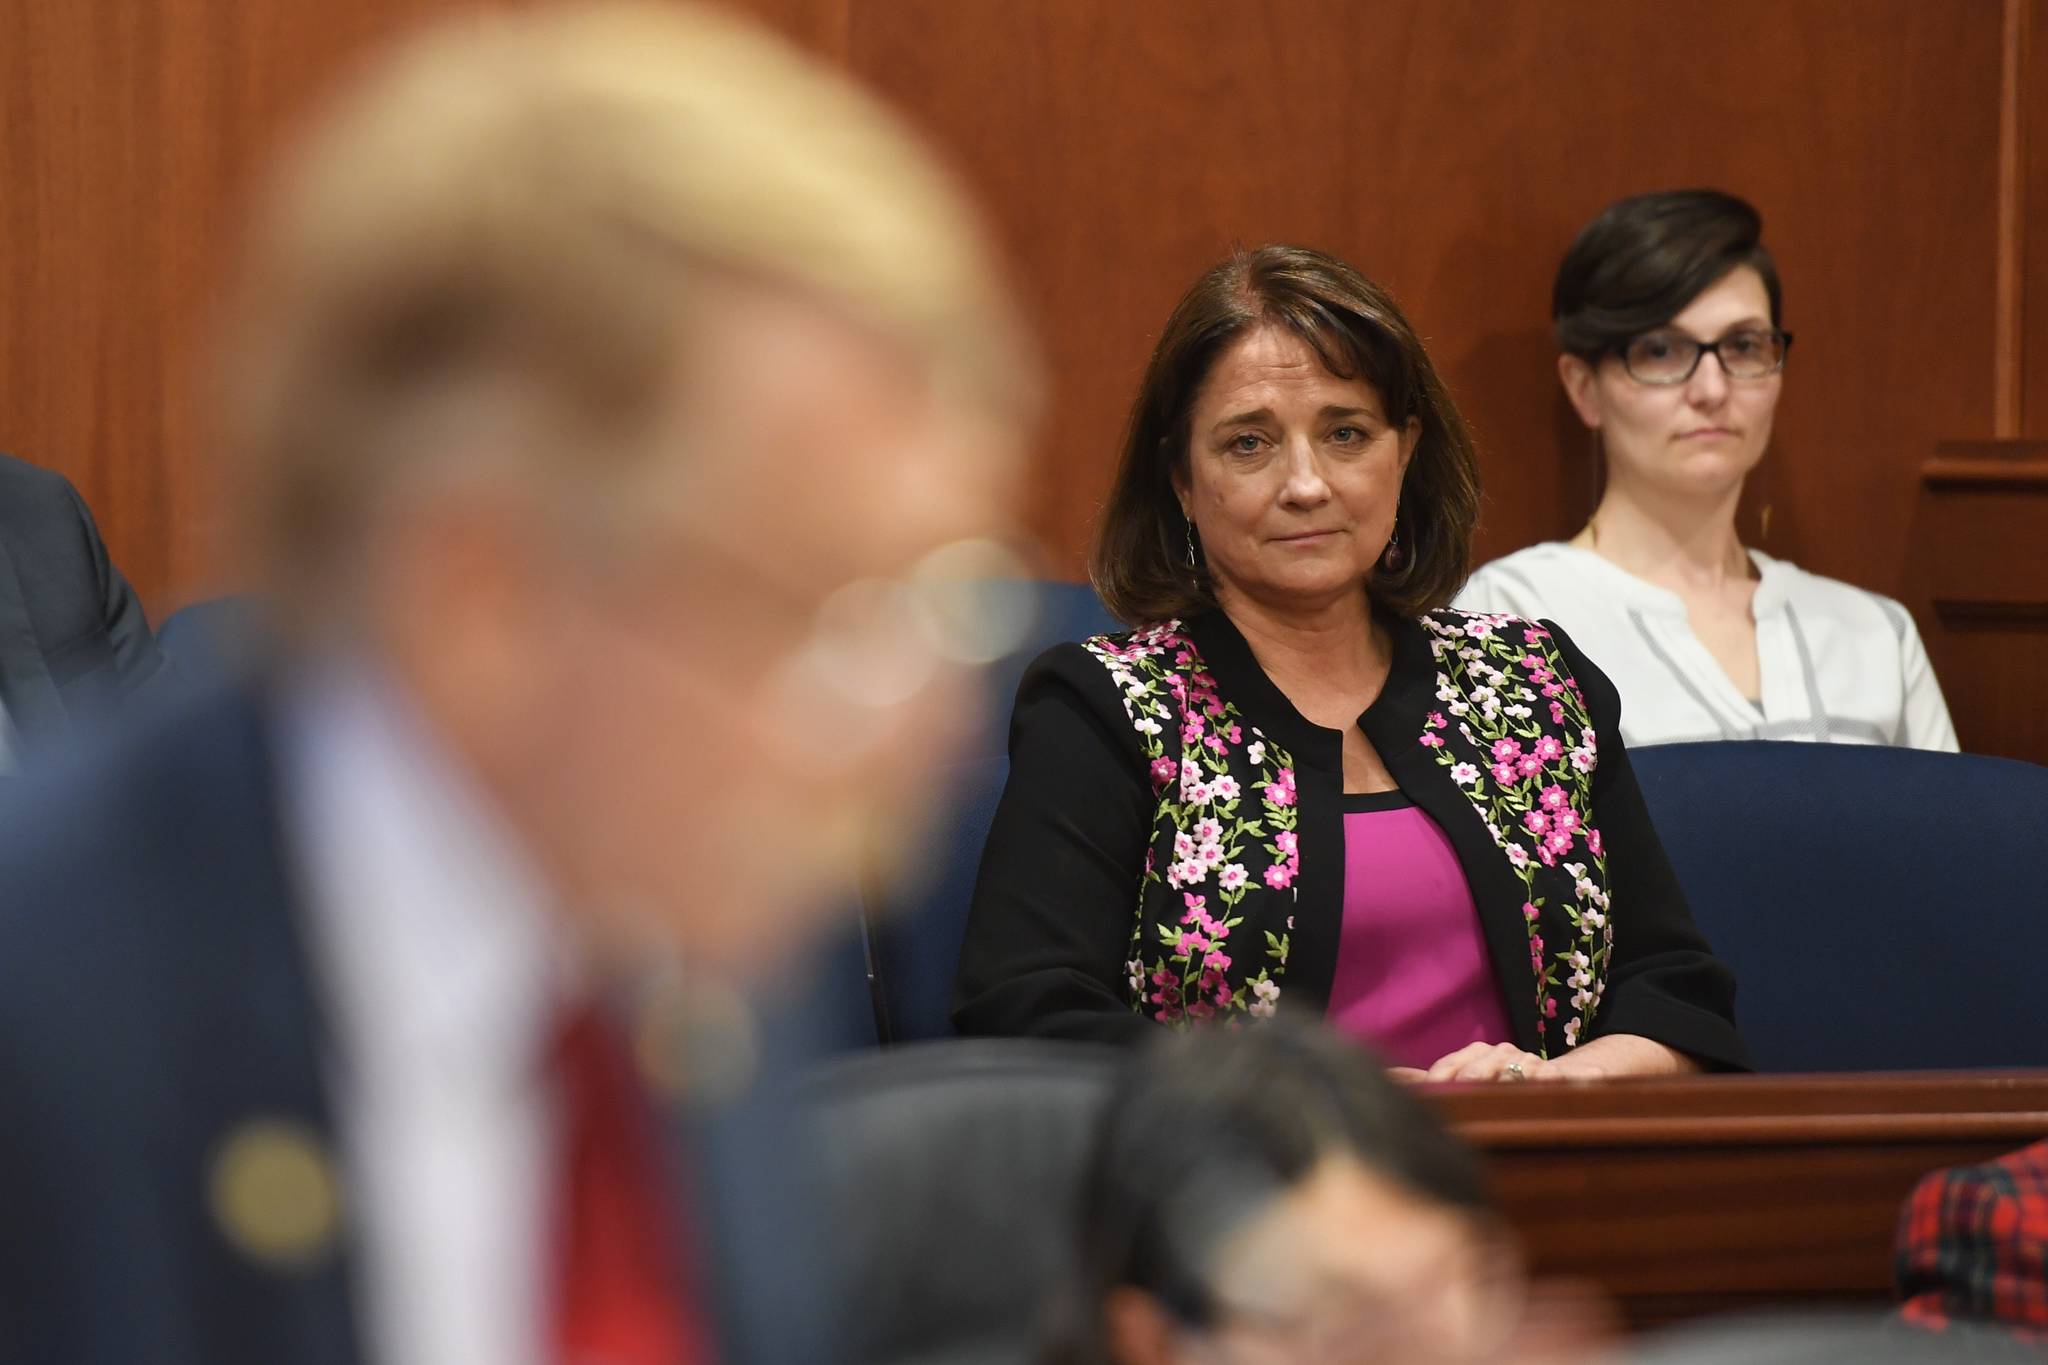 Sen. Lora Reinbold, R-Eagle River, listen from the House gallery, as representatives speak to concur with the senate crime bill at the Capitol on Tuesday, May 14, 2019. (Michael Penn | Juneau Empire)